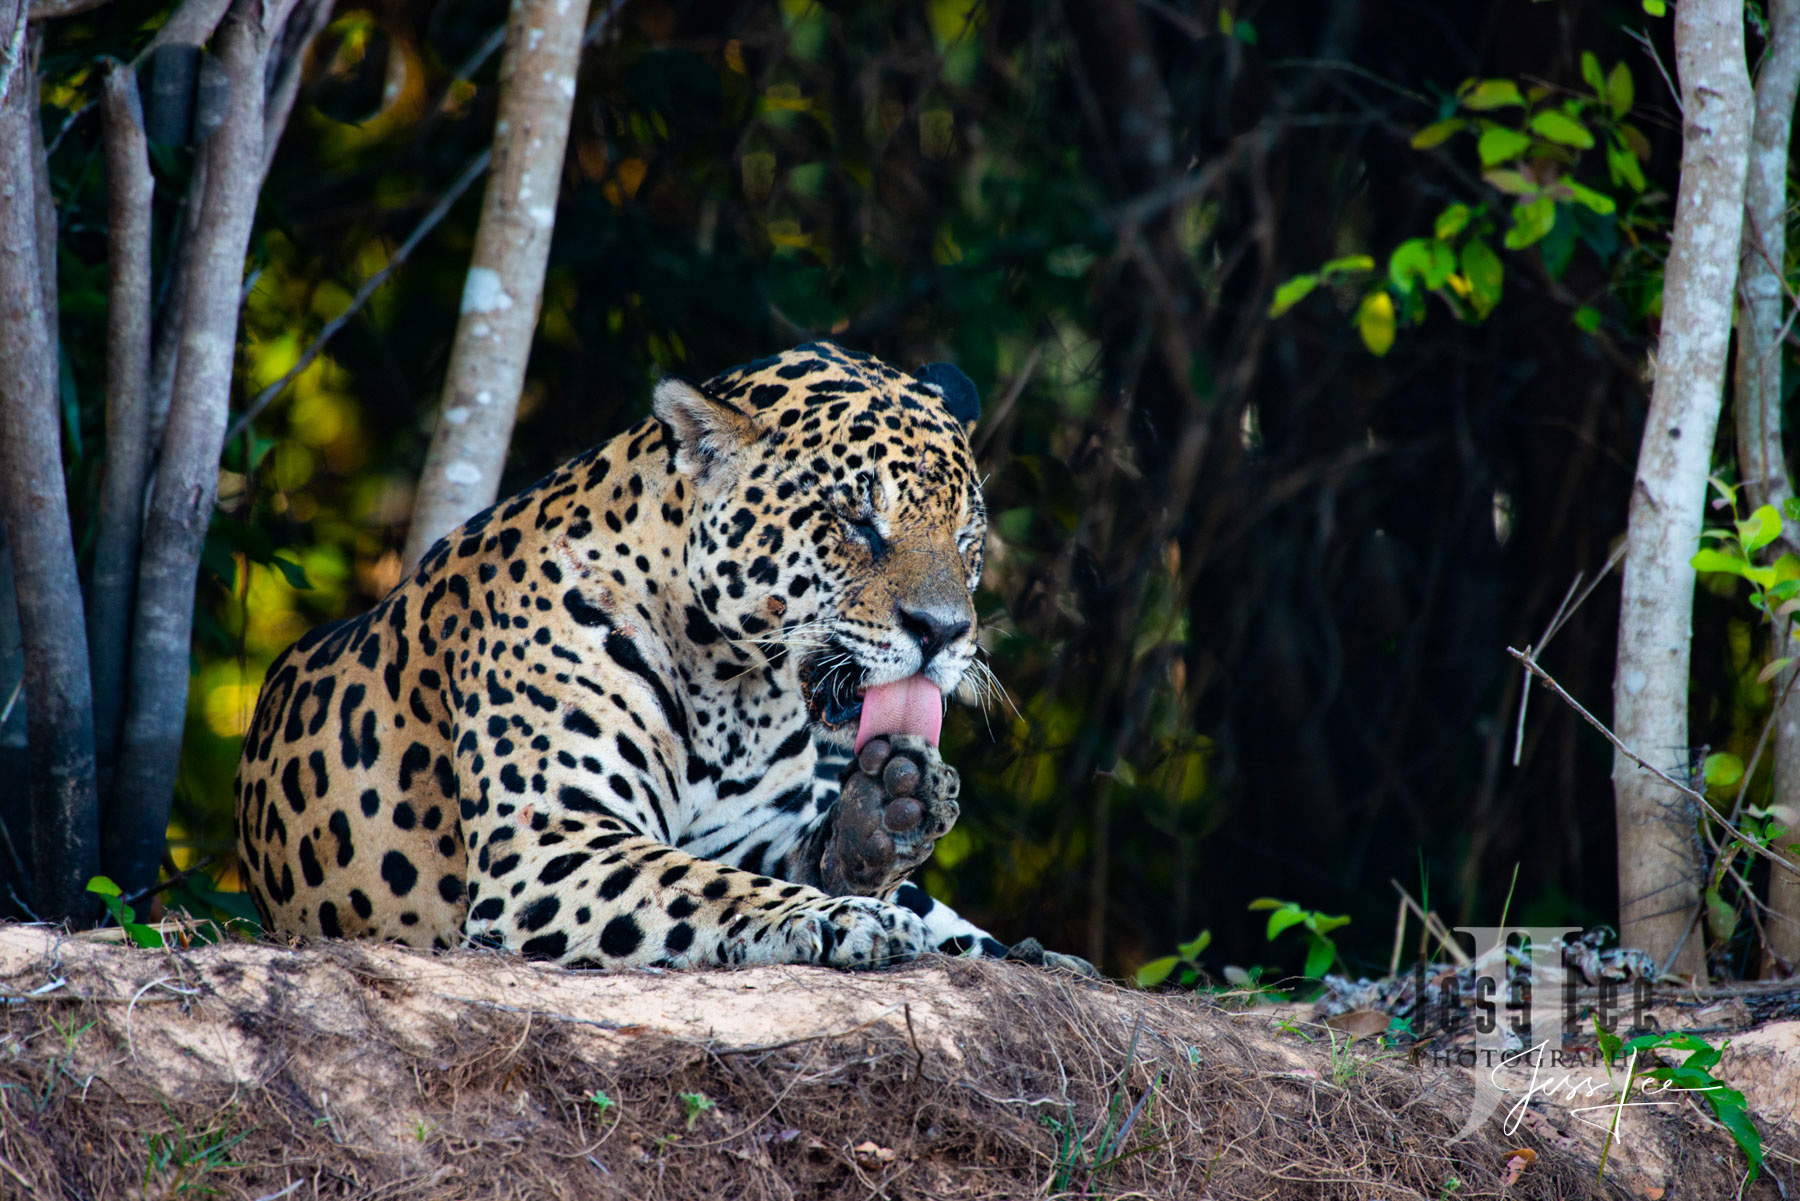 Fine art Jaguar licking its paw print limited edition of 300 luxury prints by Jess Lee. All photographs copyright © Jess Lee